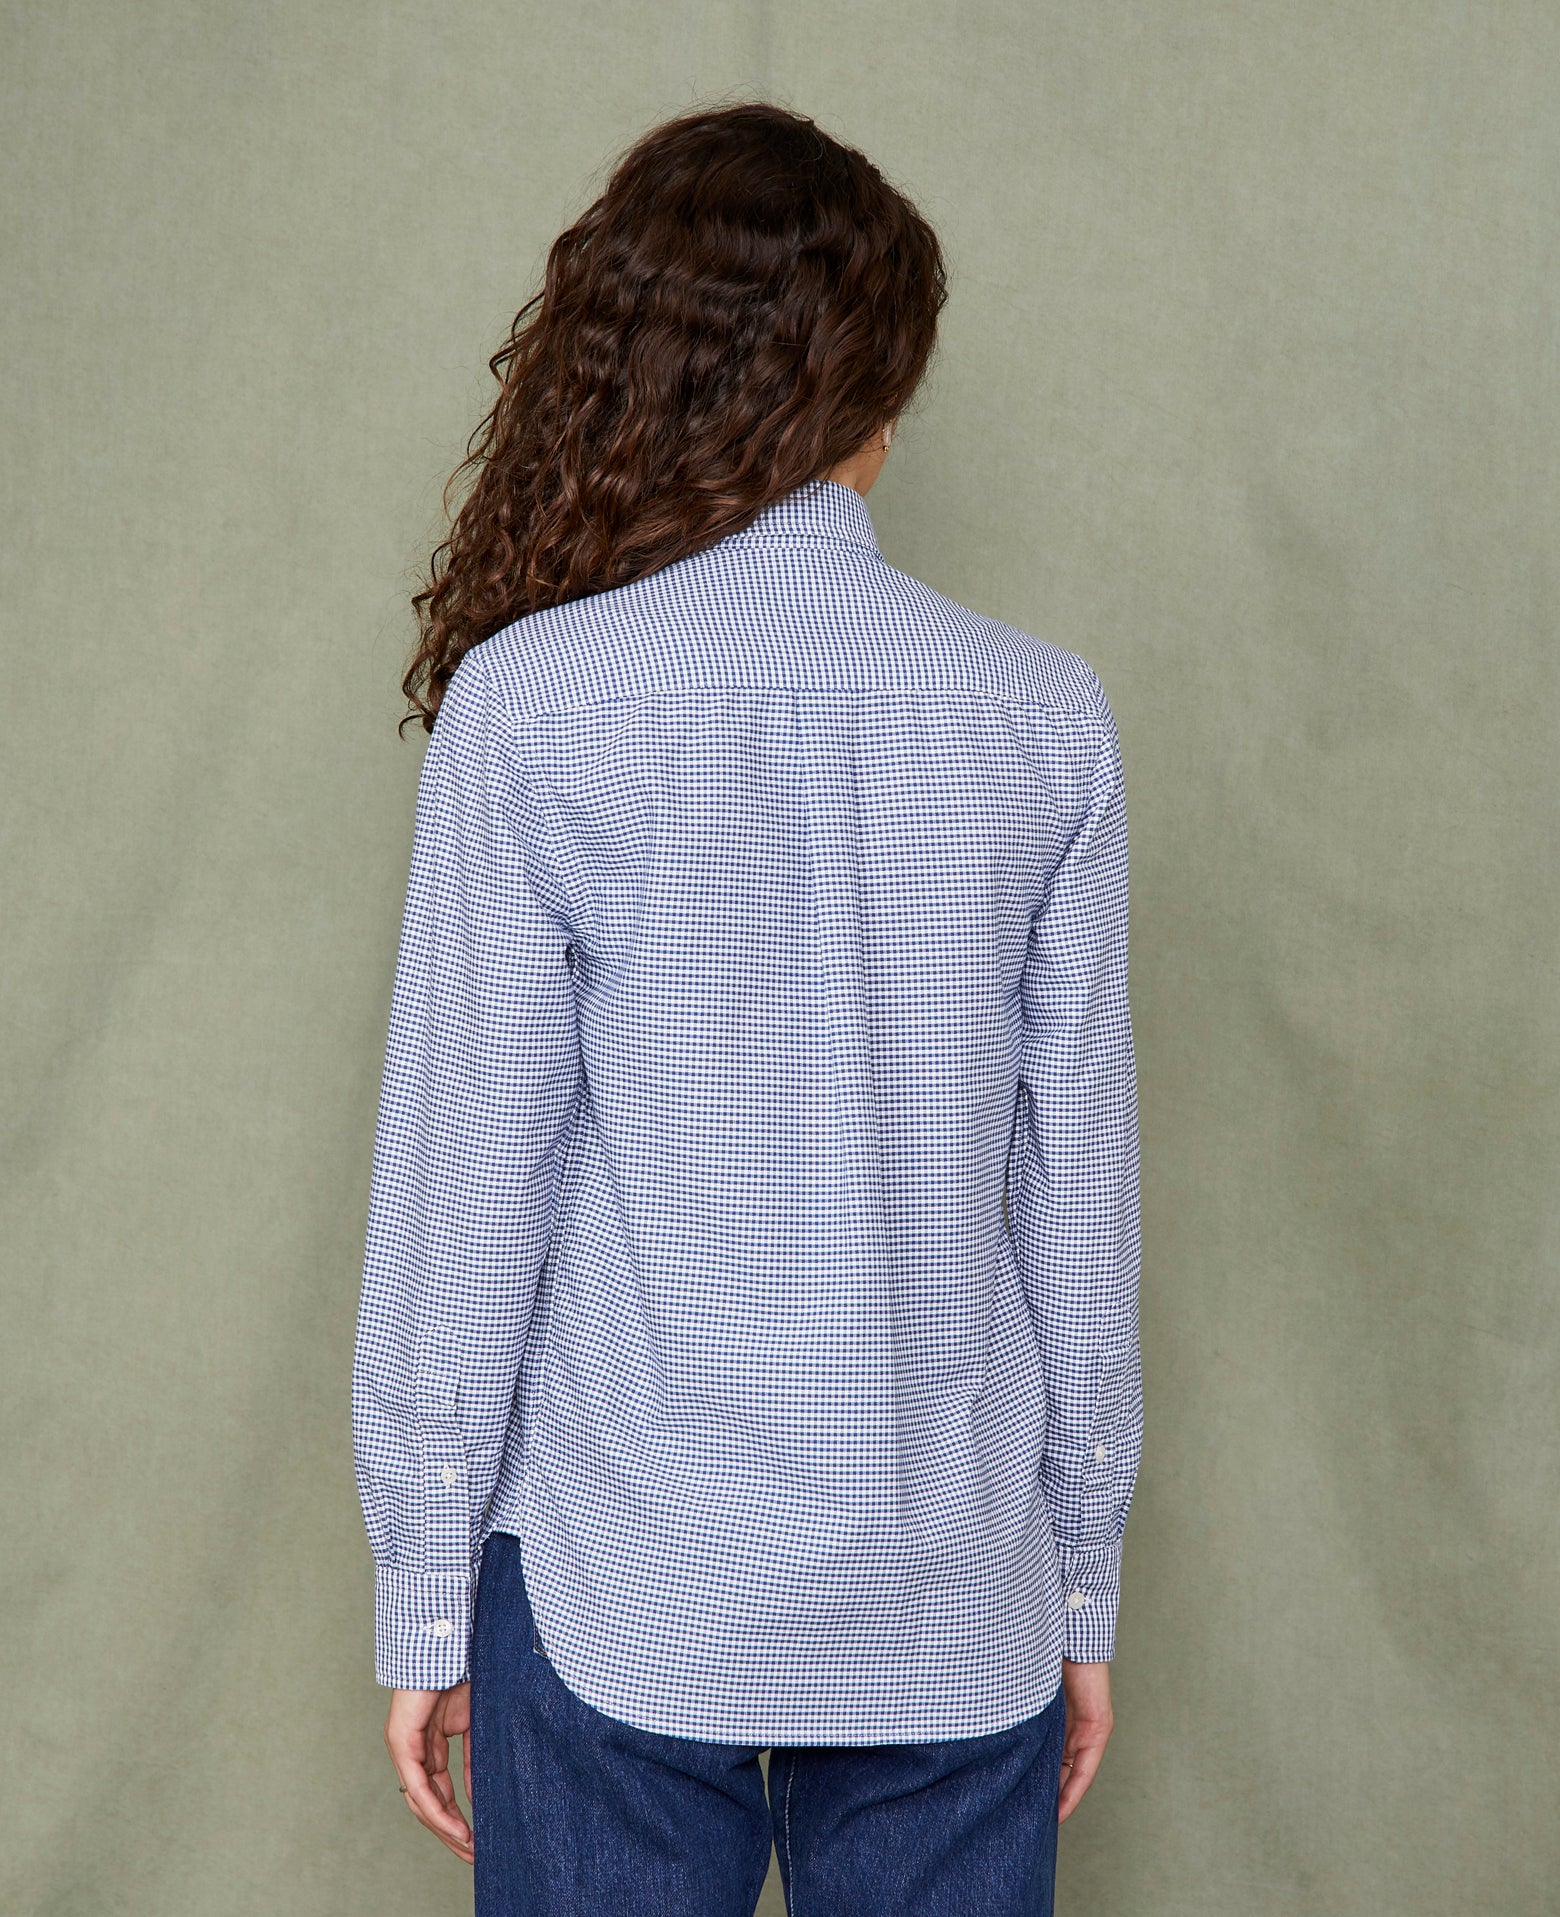 New button down shirt - Image 6